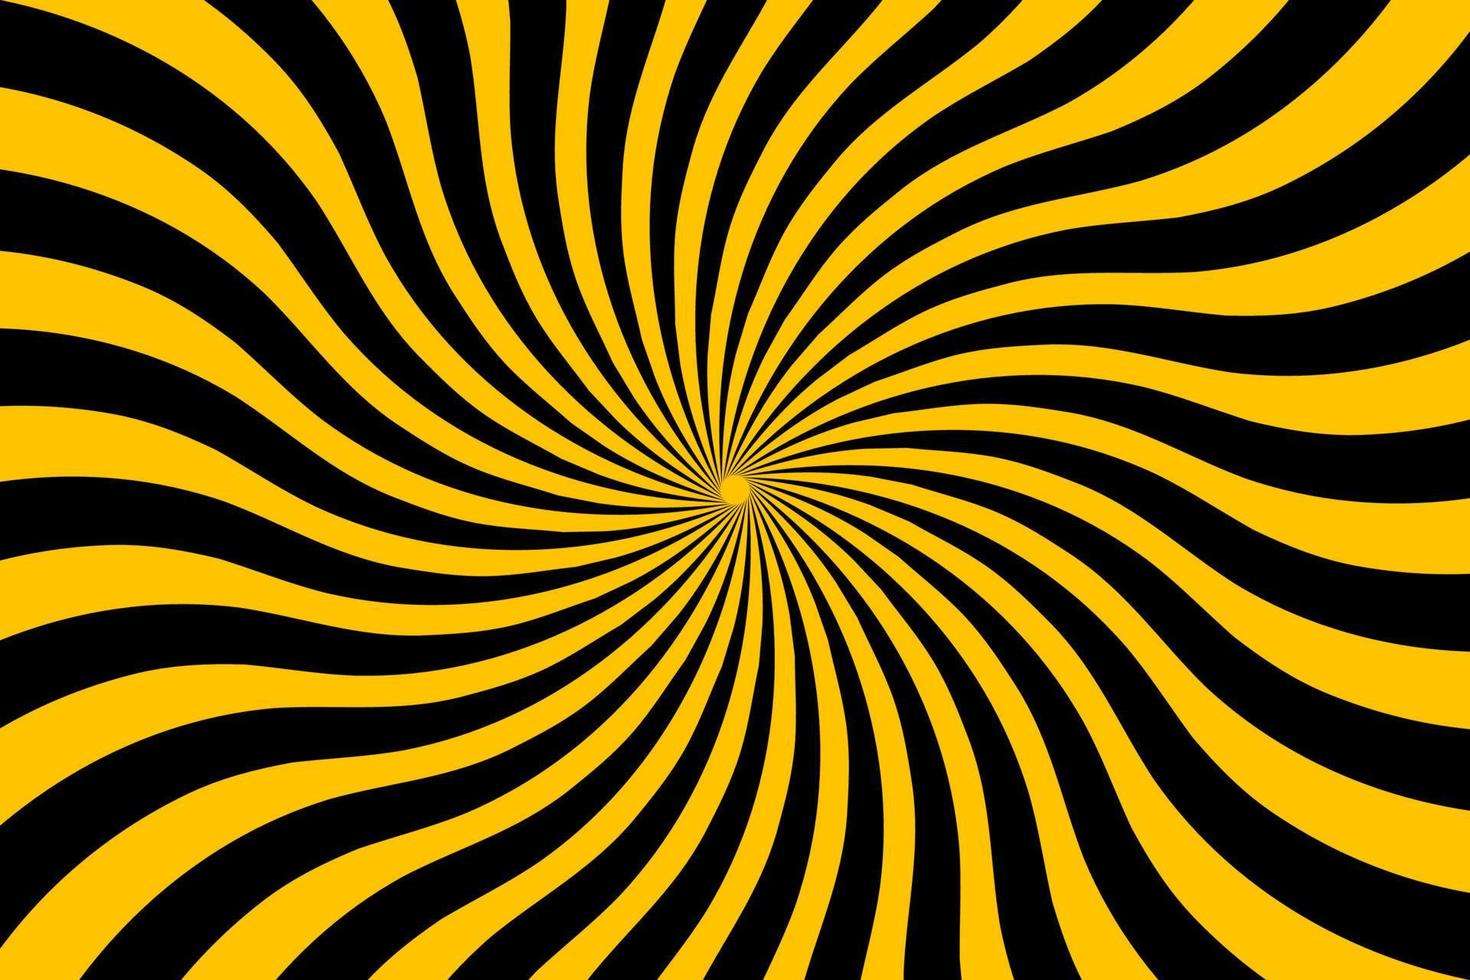 Abstract sunburst pattern psychedelic background black and yellow background design vector